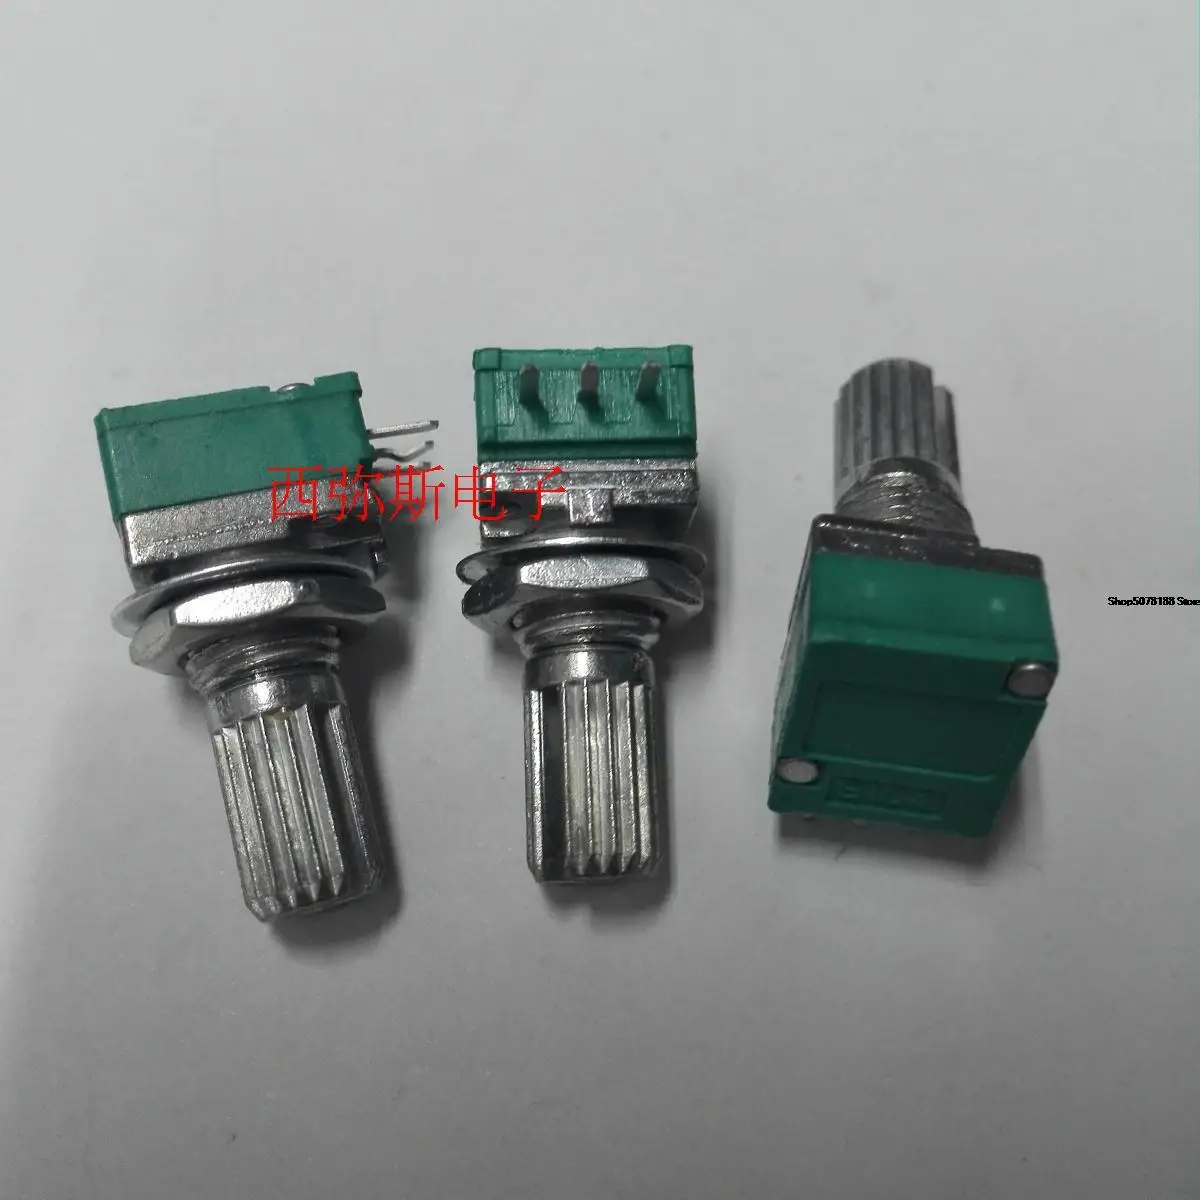 

Taiwan rv09 single sealed precision potentiometer b5k 15 axis flower shaft rv097 is in stock